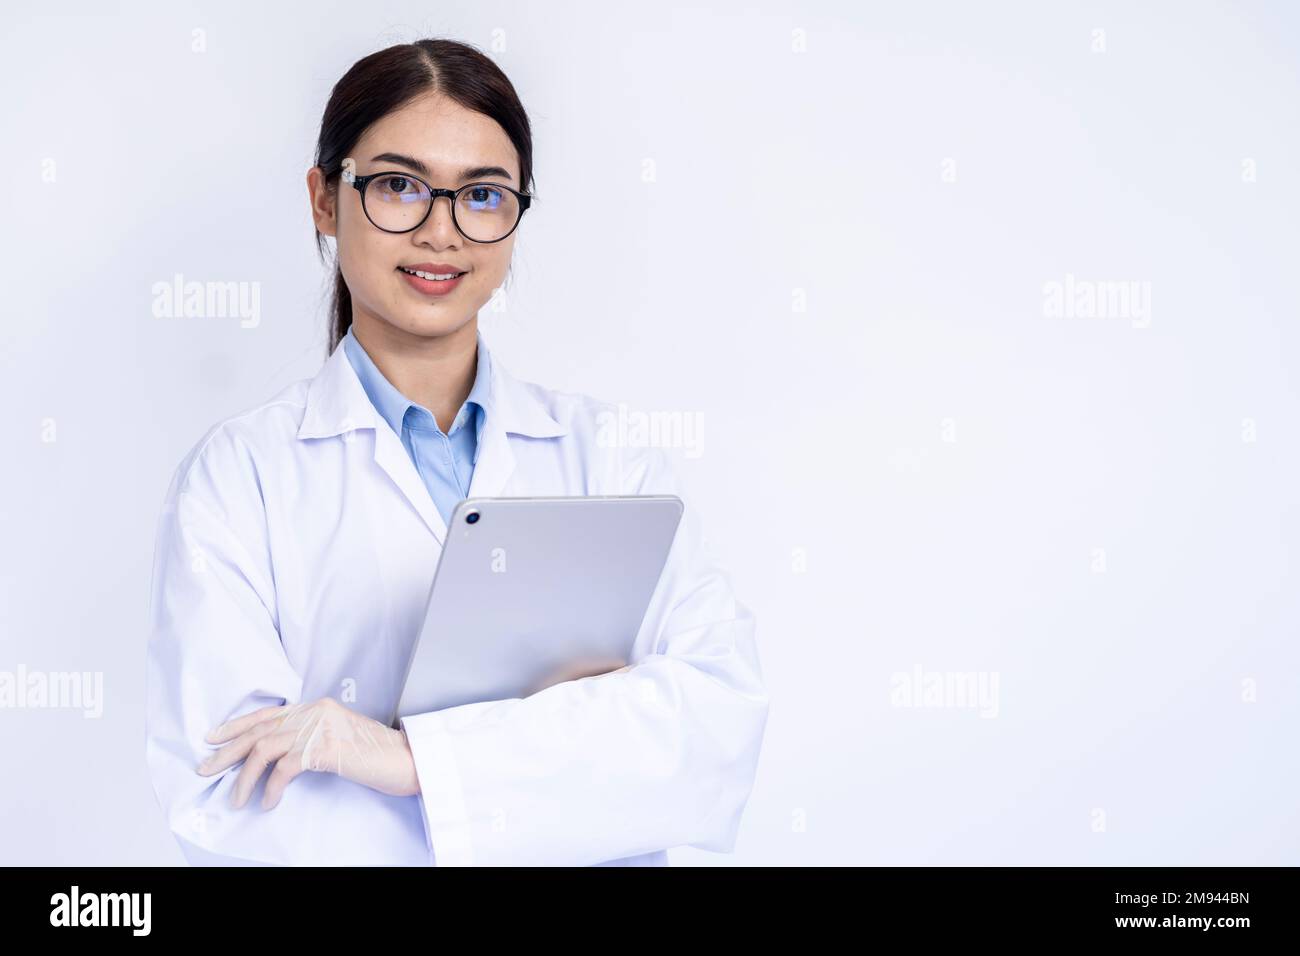 Portrait of female doctor in medical coat standing on isolated white background Stock Photo